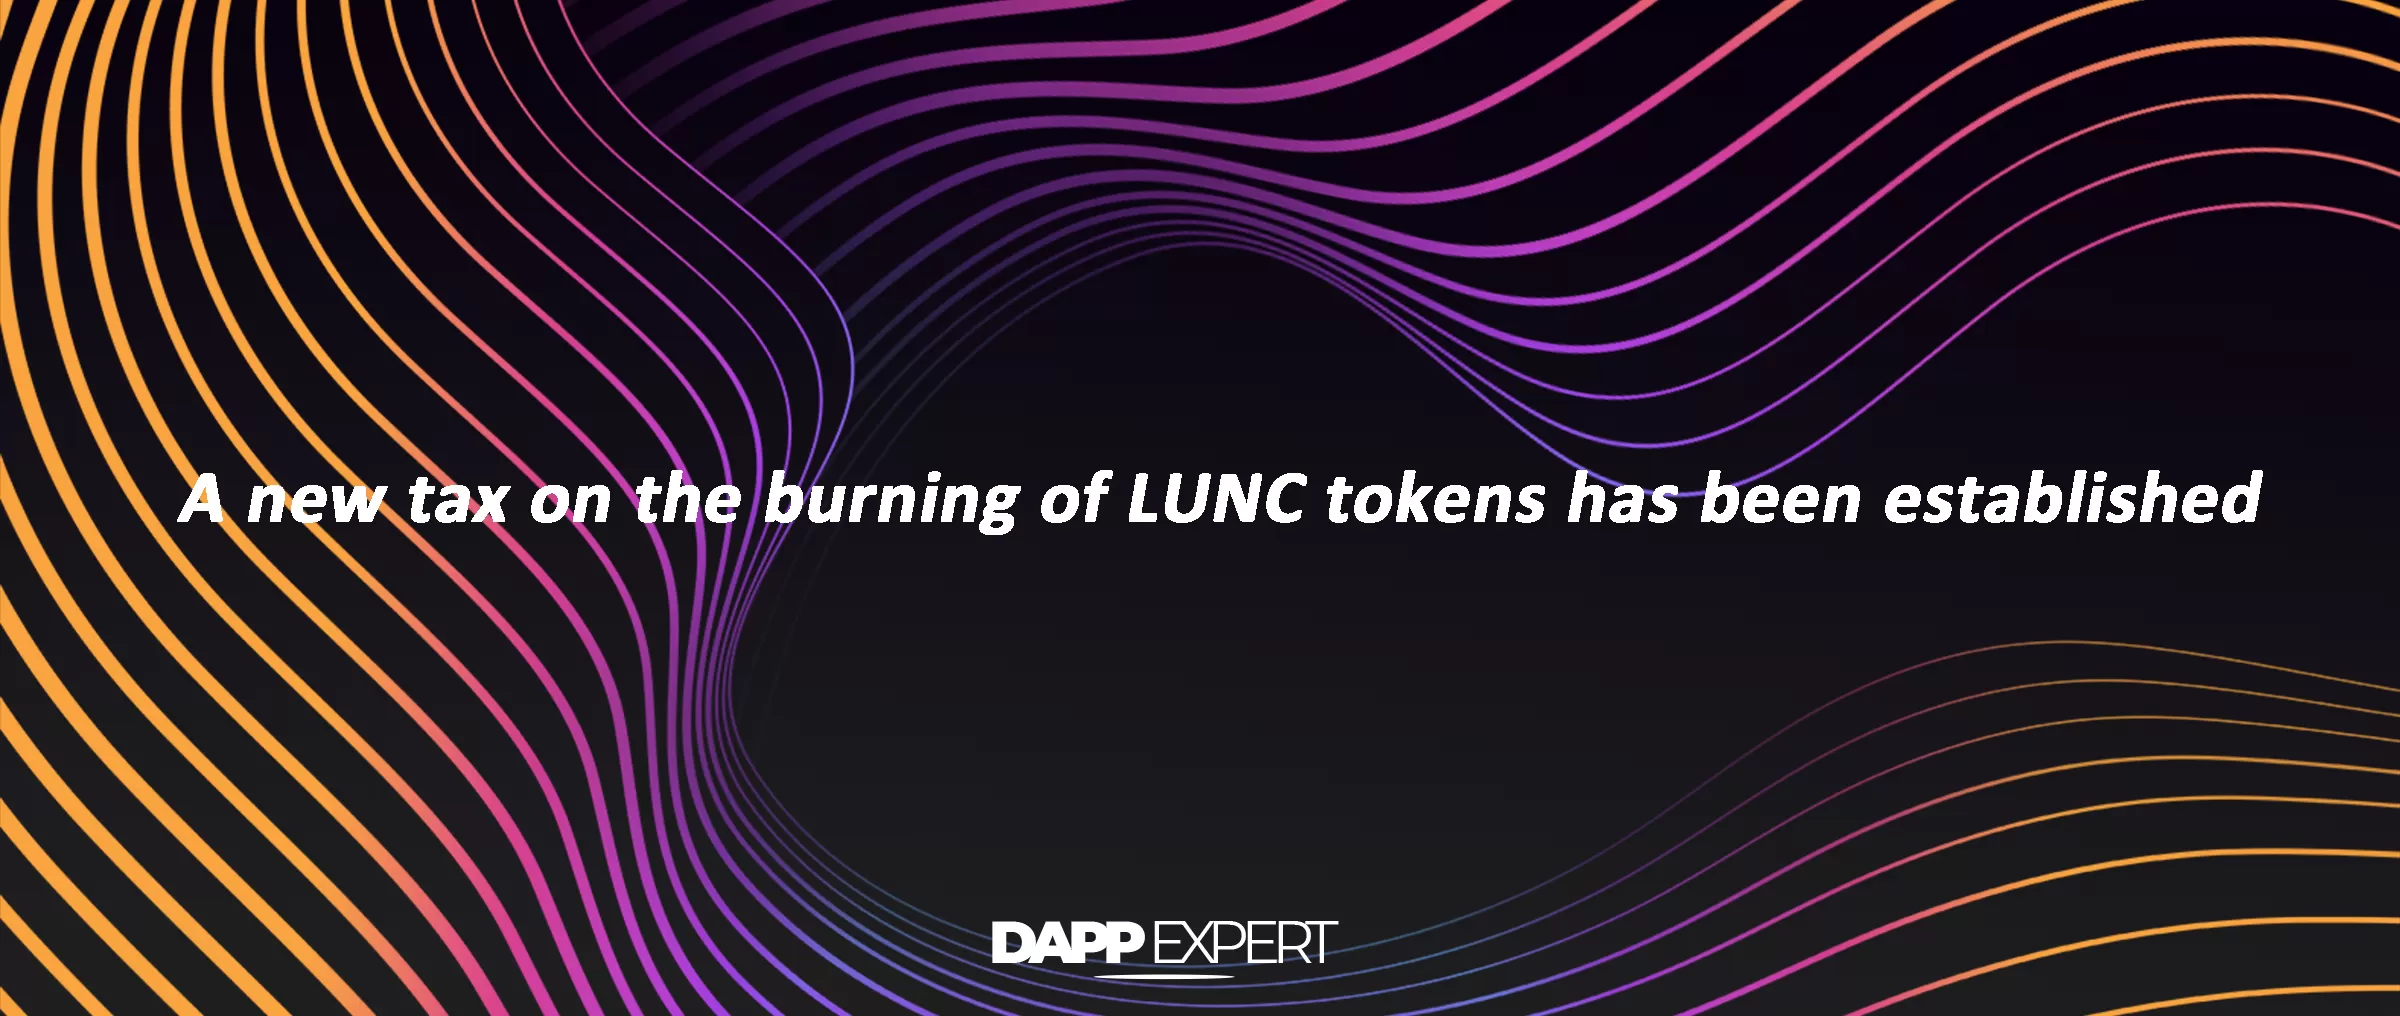 A new tax on the burning of LUNC tokens has been established